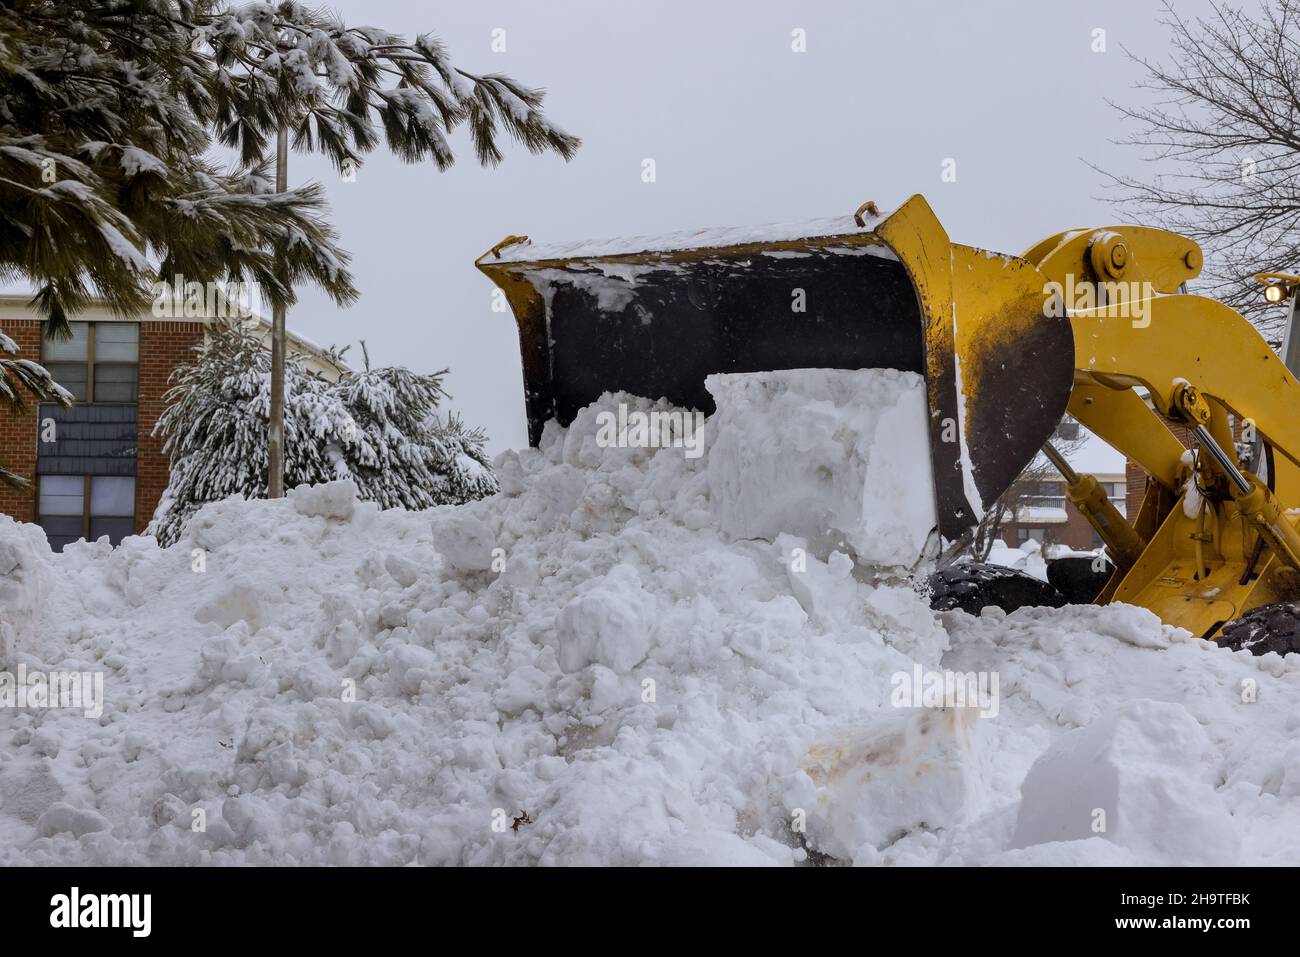 Municipal service with snowplow removing snow from road Stock Photo